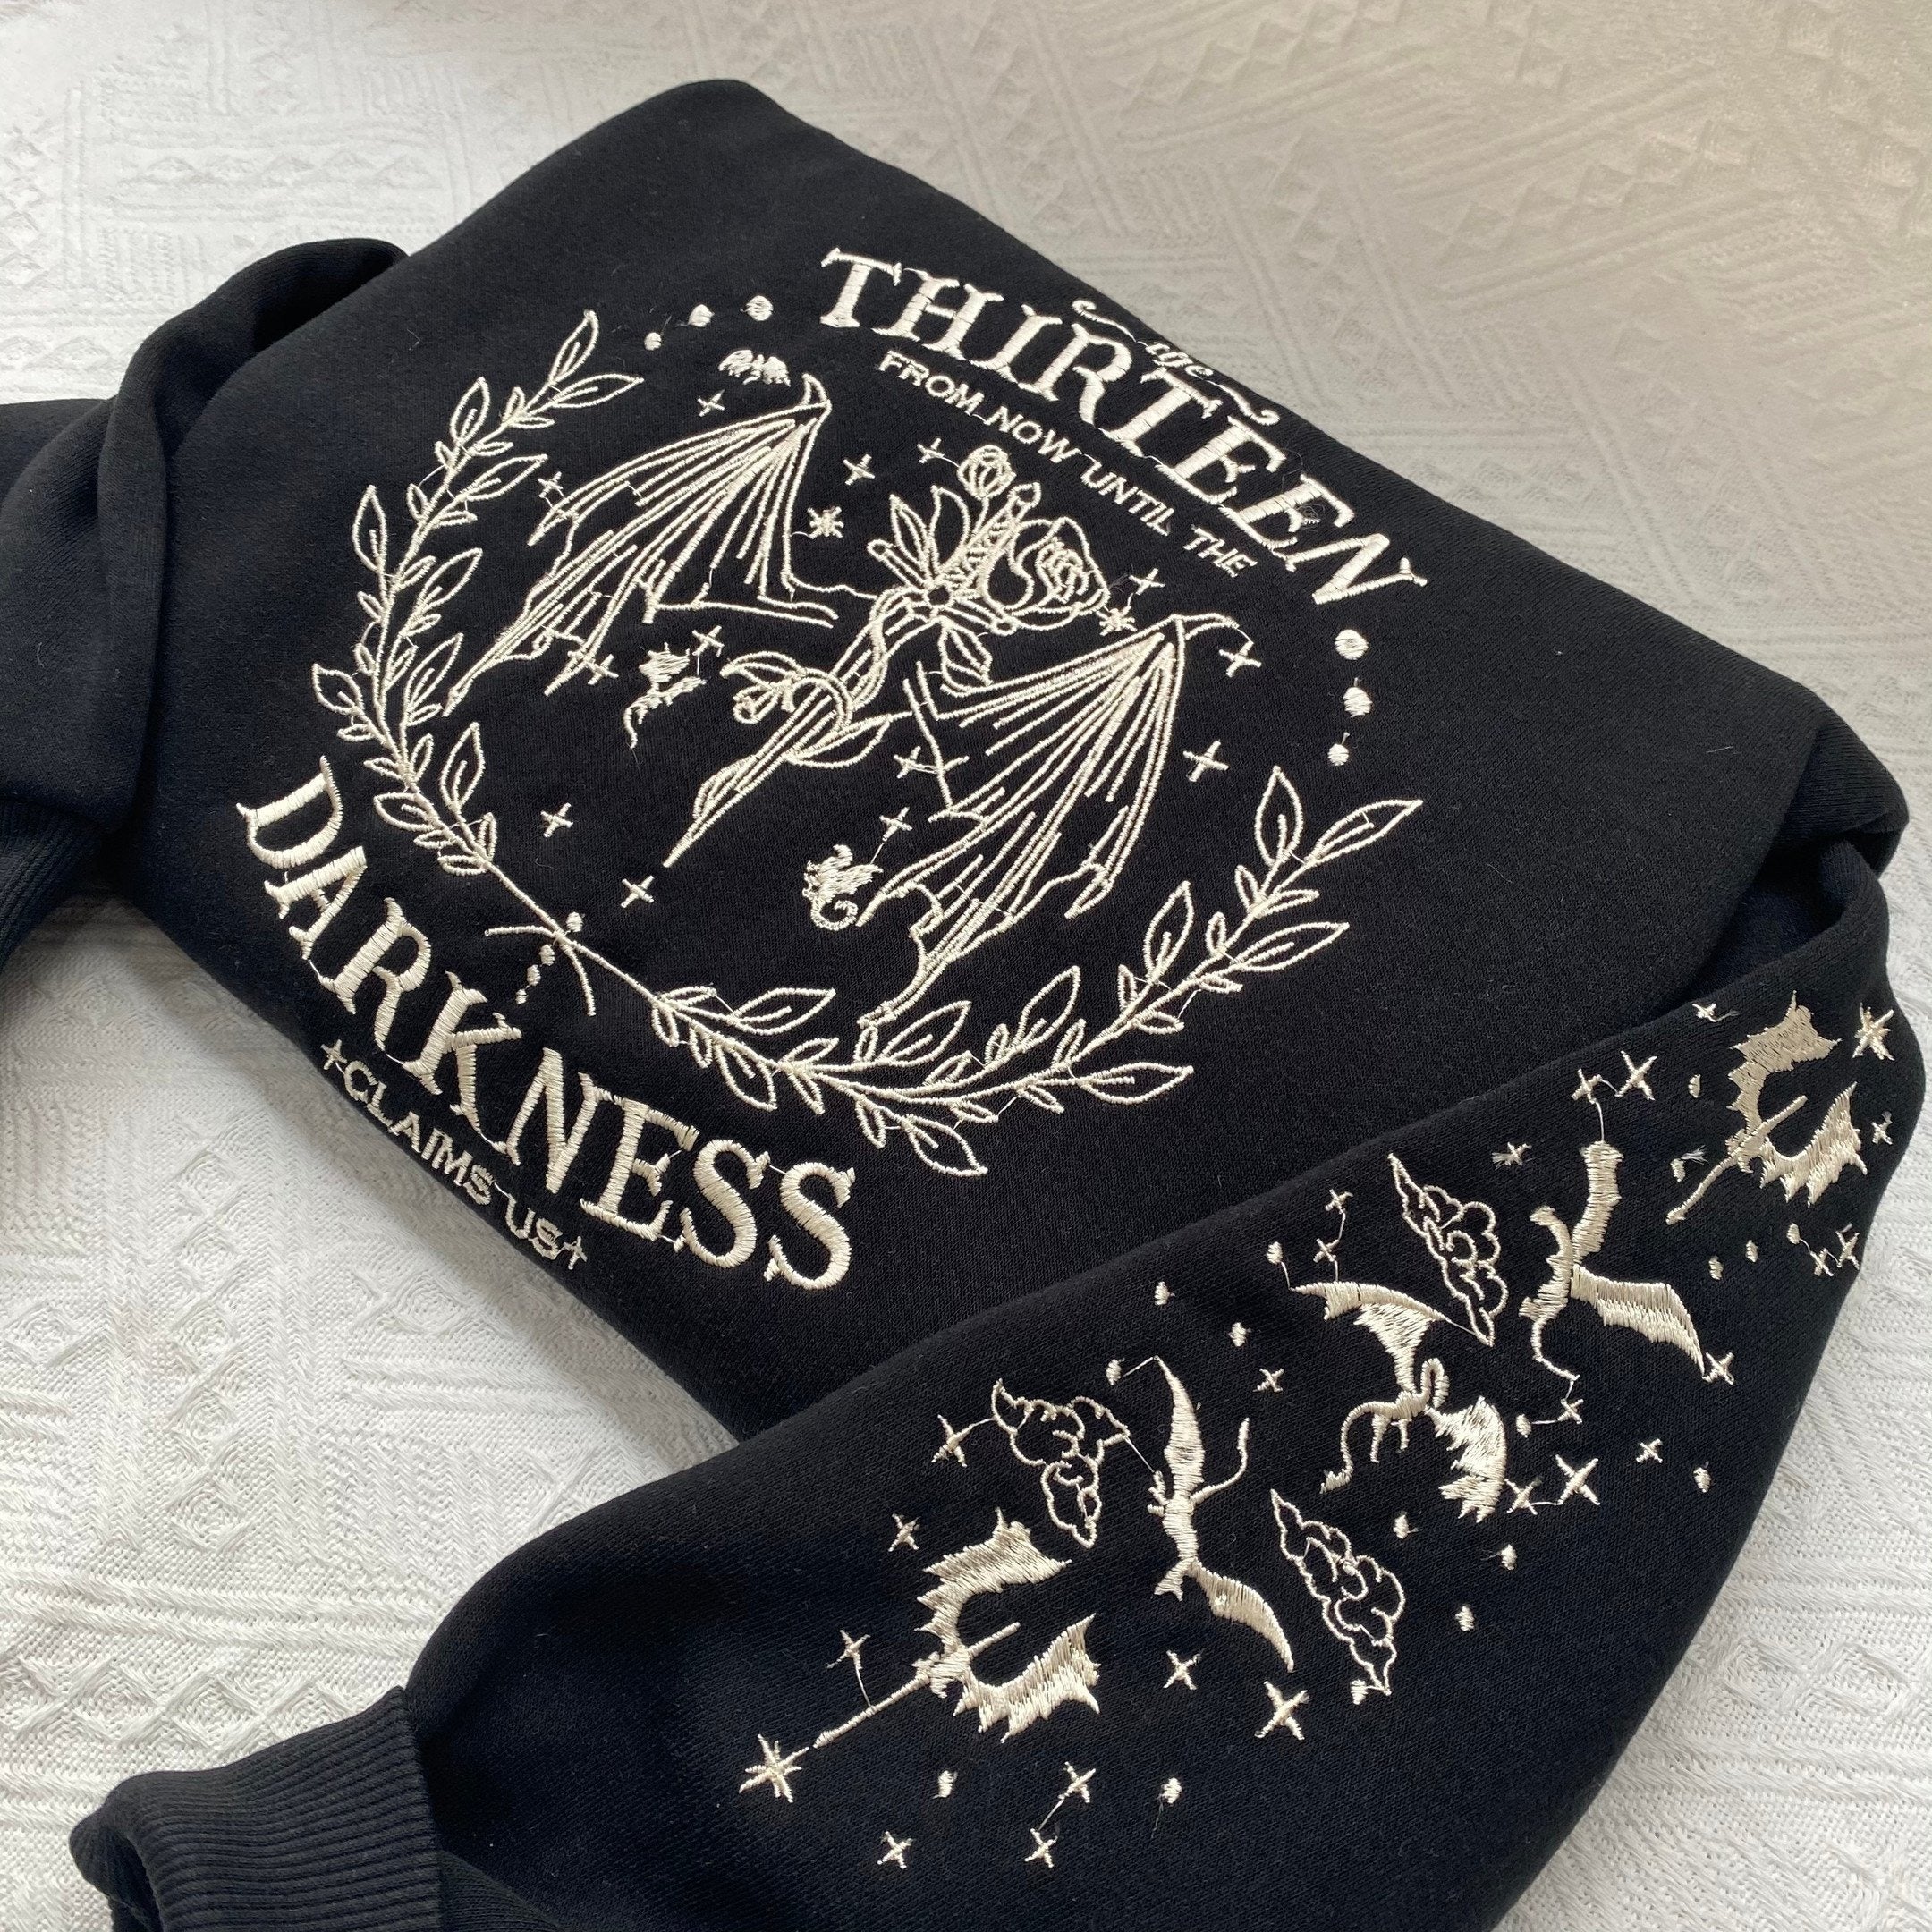 The Thirteen Throne Of Glass Embroidered Sweatshirt, From Now Until the Darkness Claims Us Embroidered Hoodie, Bookish Gift